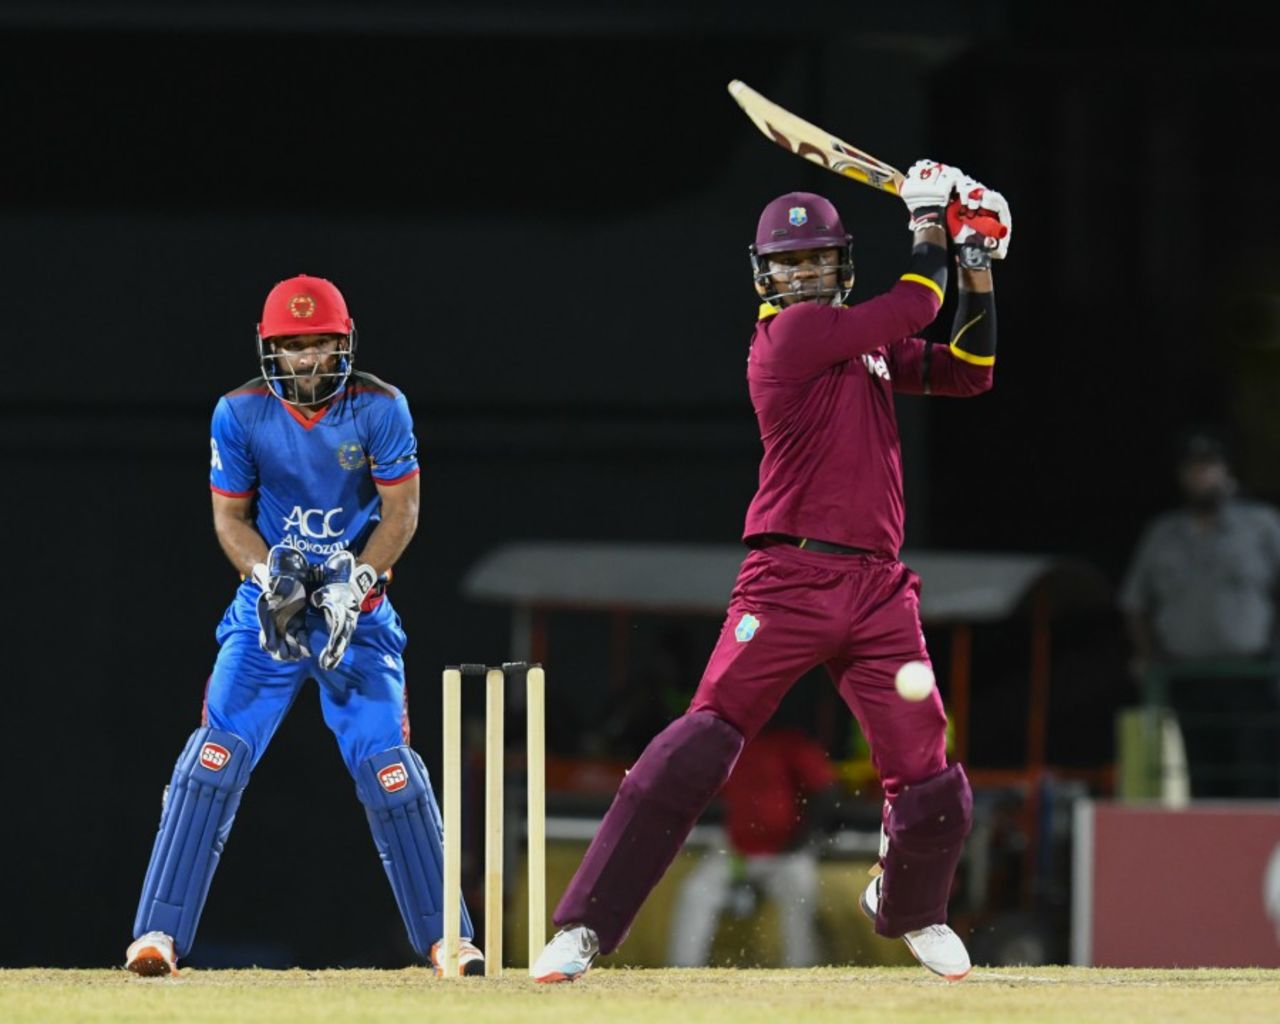 Marlon Samuels eased West Indies' chase with 35, West Indies v Afghanistan, 1st T20, Basseterre, June 2, 2017